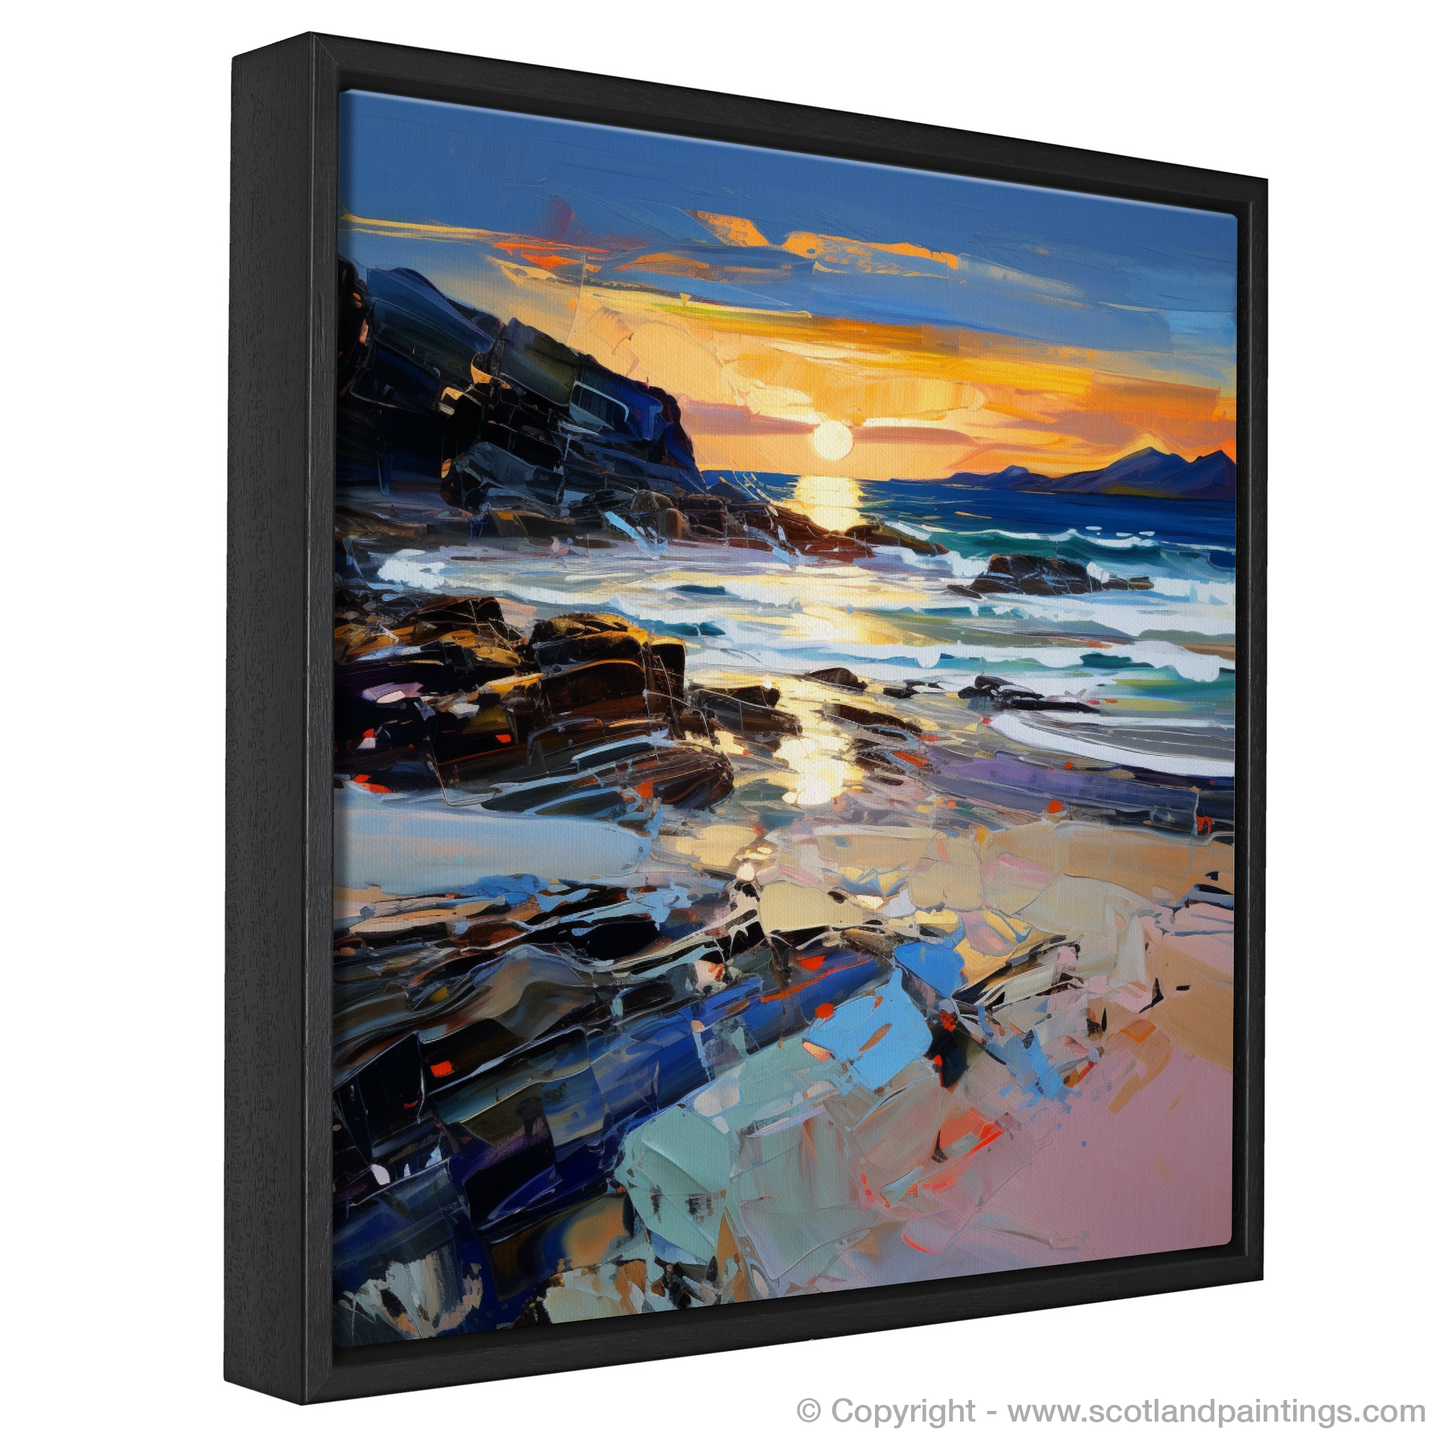 Painting and Art Print of Seilebost Beach at dusk entitled "Dusk Embrace at Seilebost Beach".